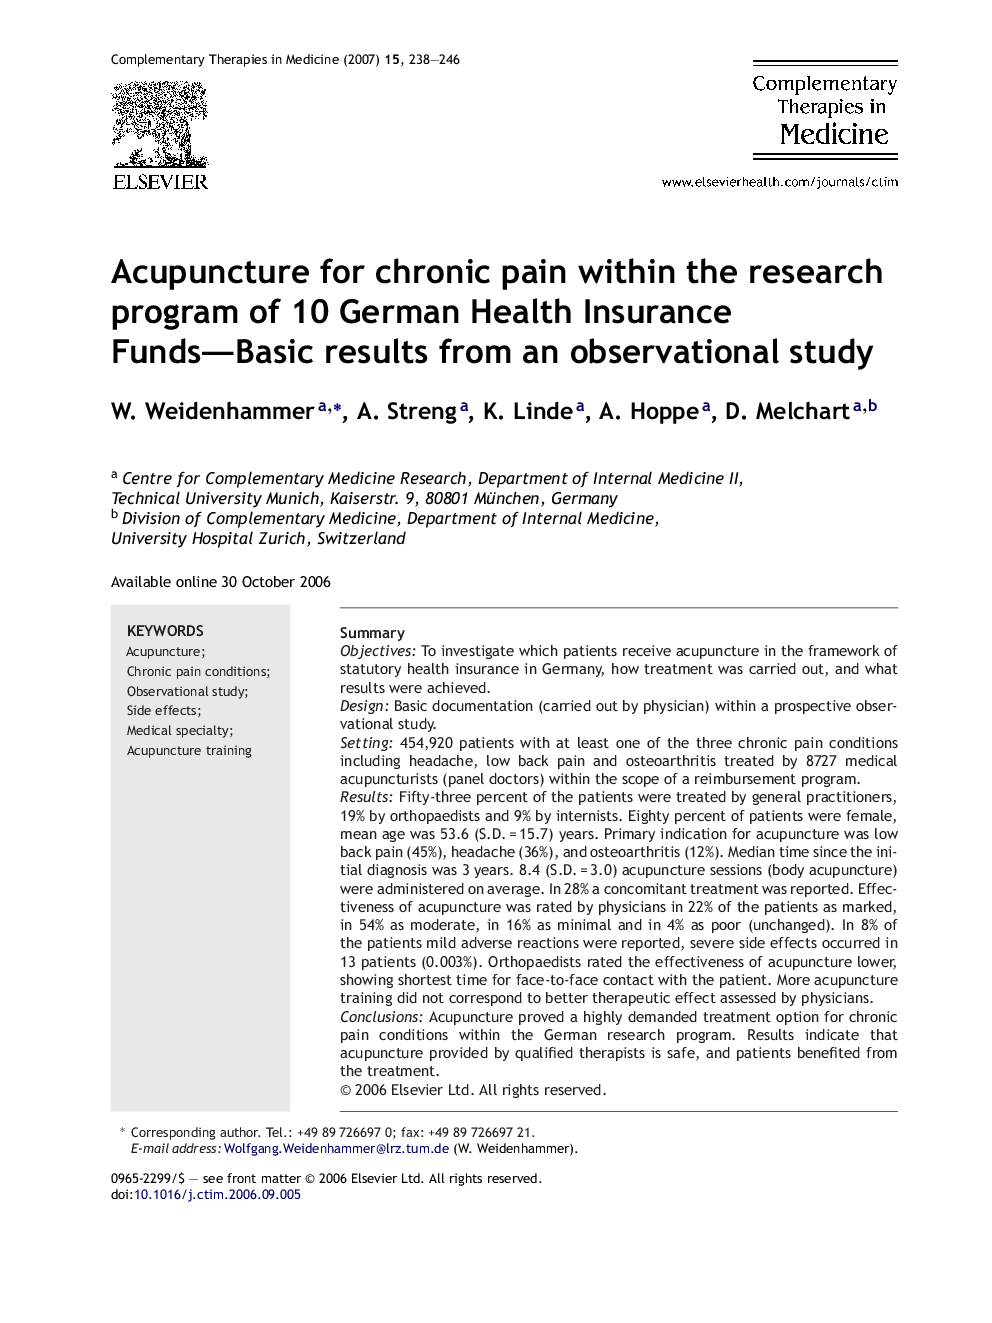 Acupuncture for chronic pain within the research program of 10 German Health Insurance Funds—Basic results from an observational study